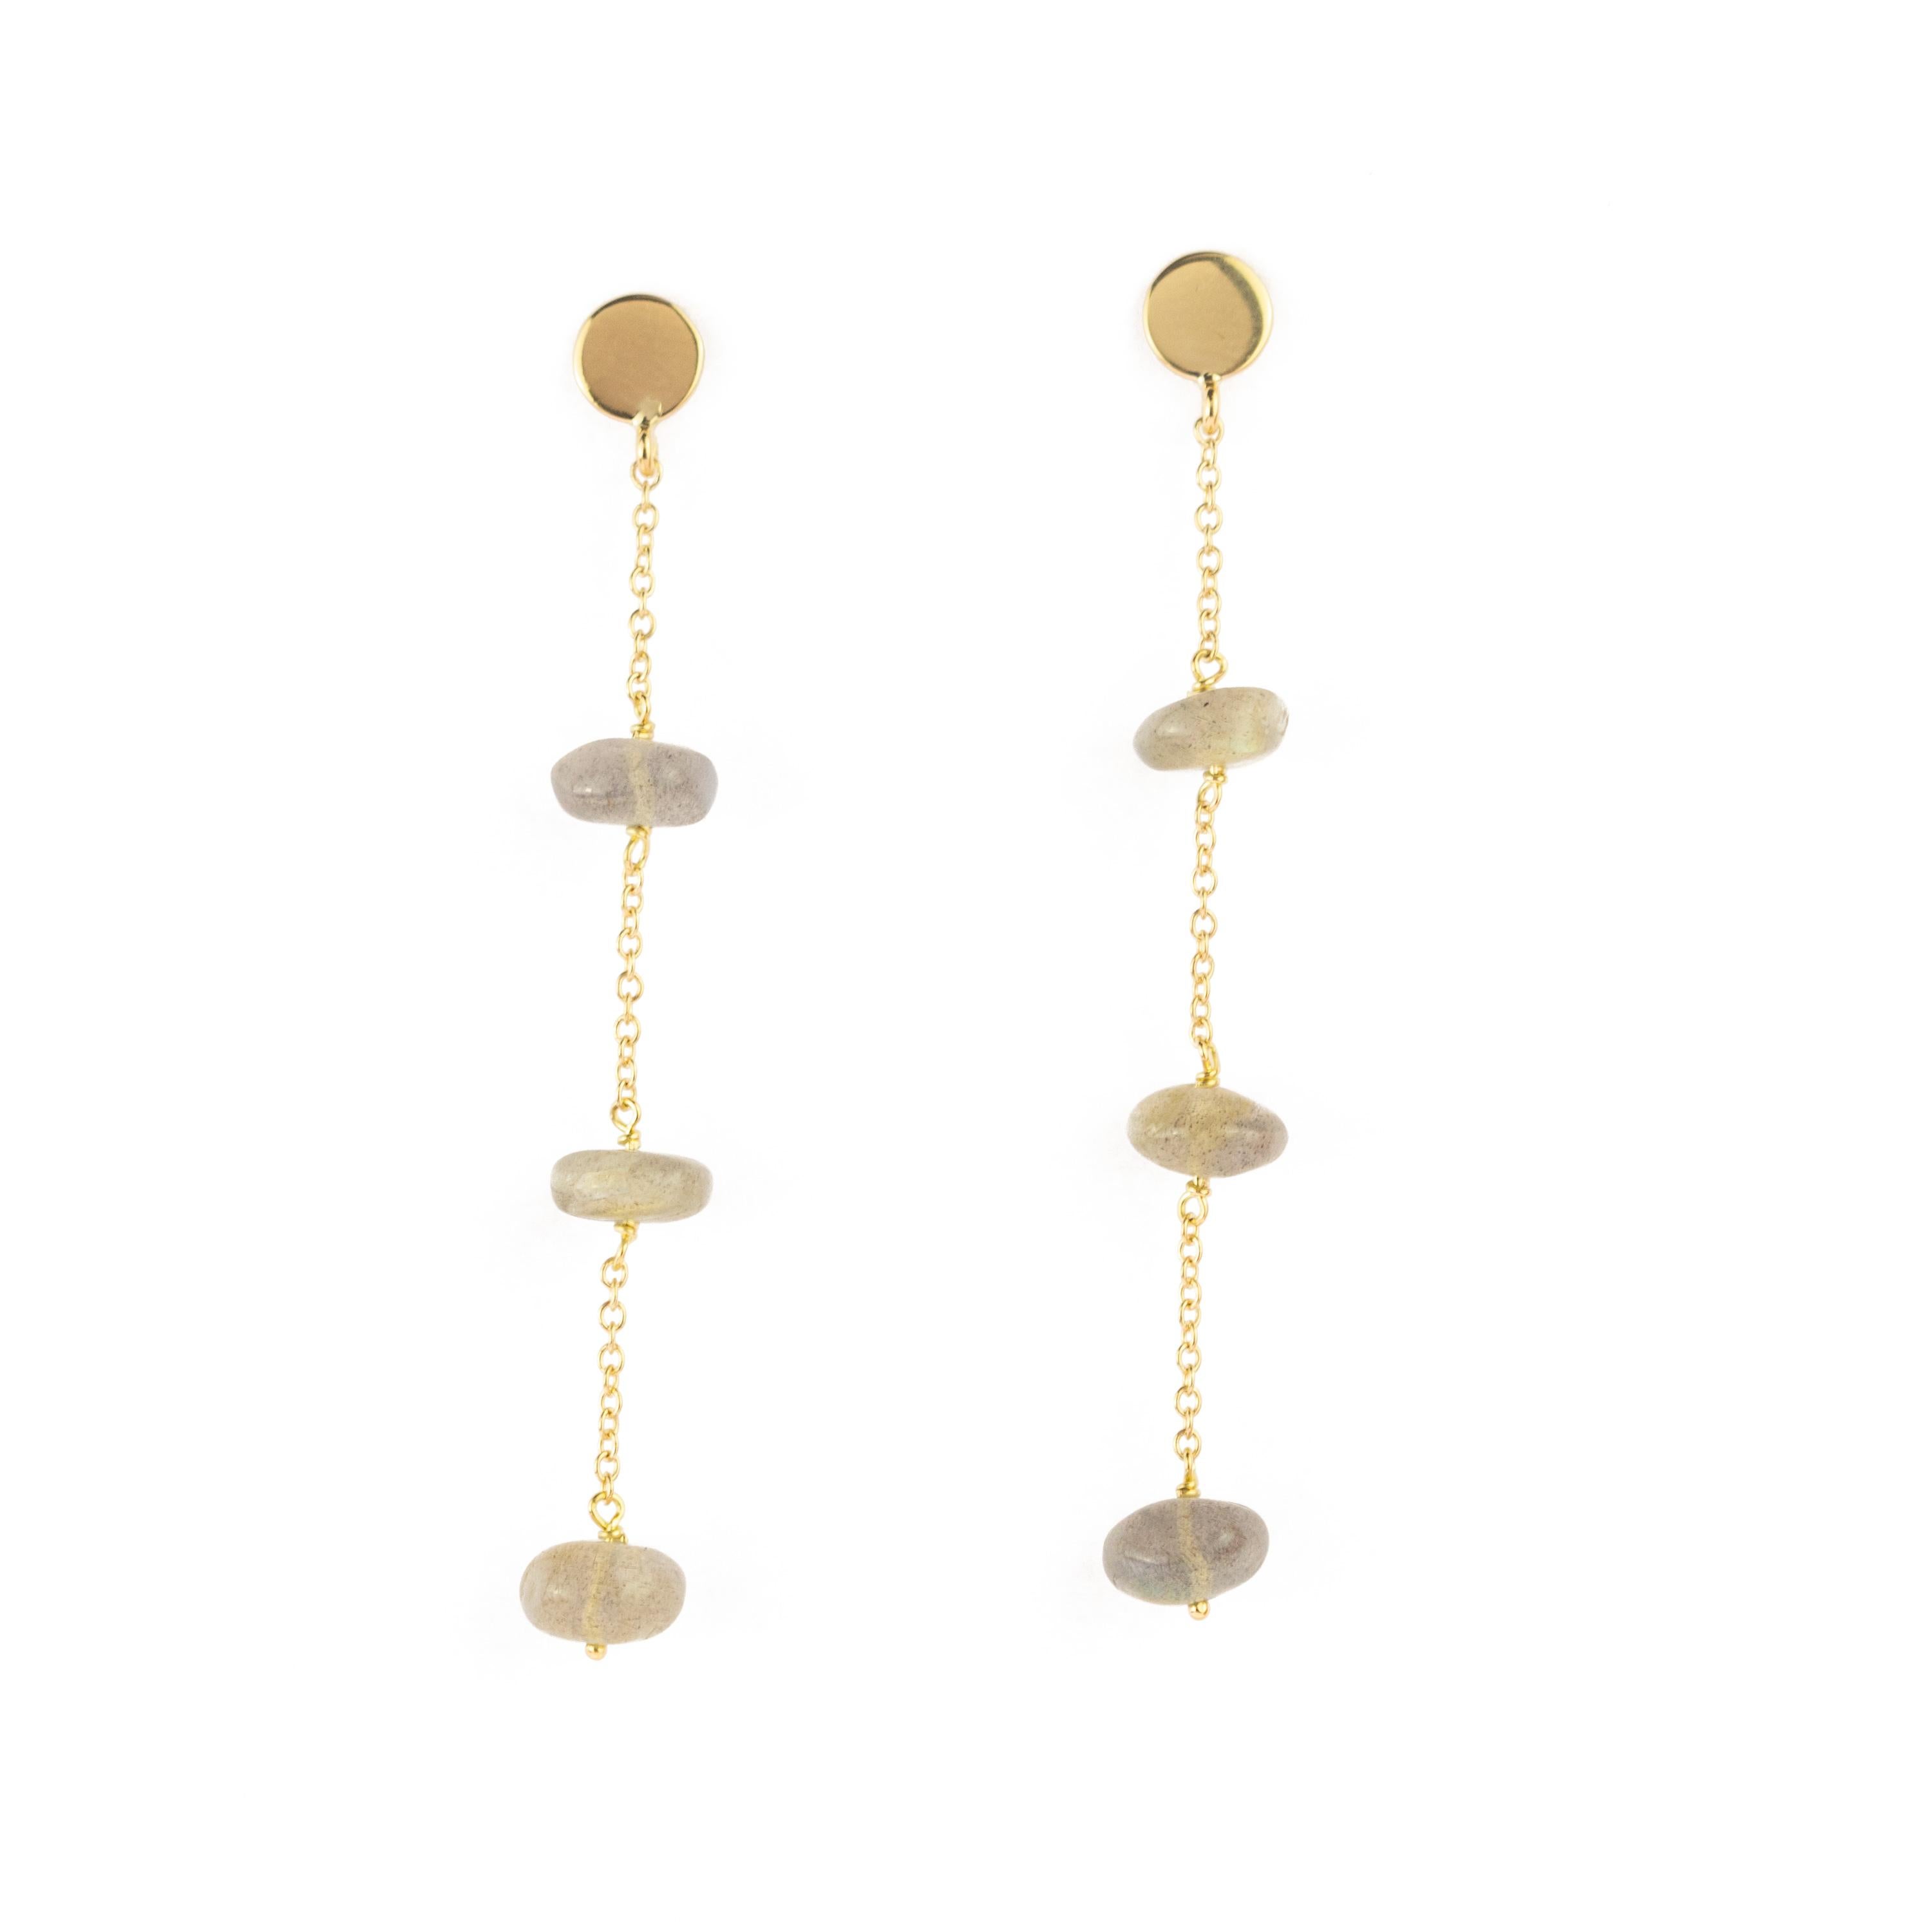 Intini Jewels signature quality on a modern and contemporary design jewel. Stunning long and dangle earrings with three Cat's Eye beads. Embellished with a Gold Plate chain will make you look beautiful and full of charm.

Cat's Eye Stone has meaning